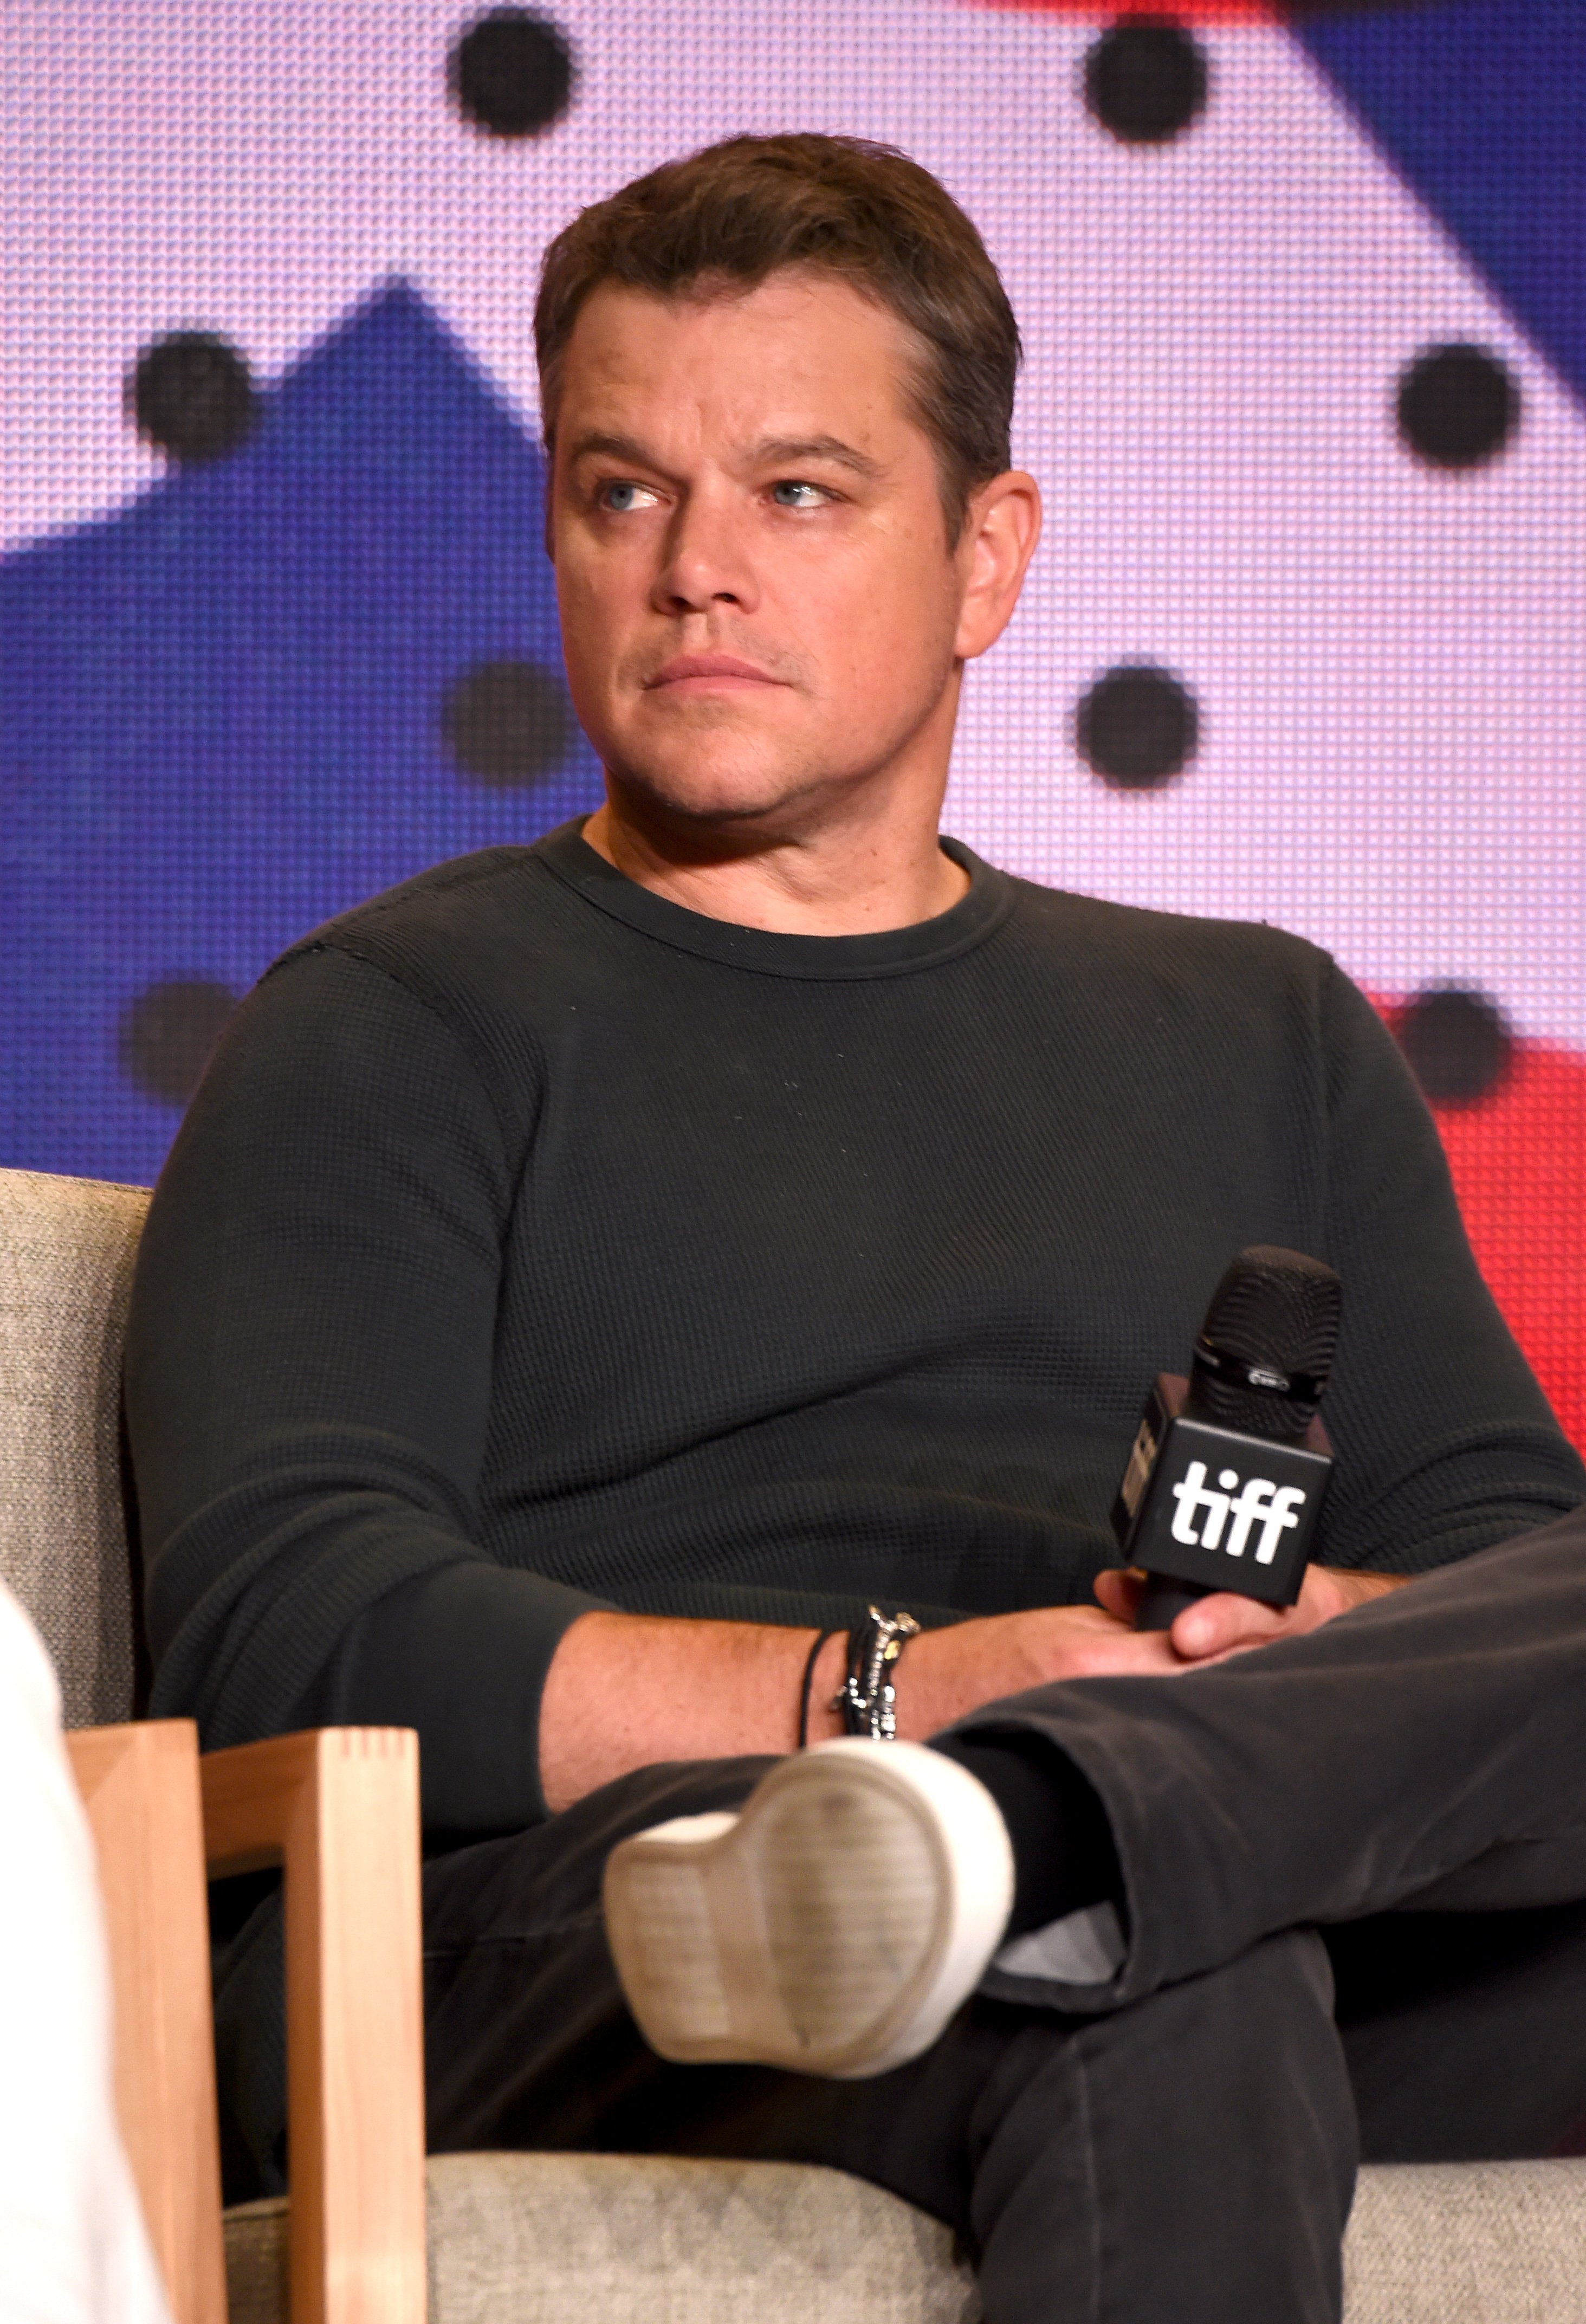  Matt Damon speaks onstage during the "Downsizing" press conference during the 2017 Toronto International Film Festival at TIFF Bell Lightbox on September 10, 2017 in Toronto, Canada | Photo: Getty Images